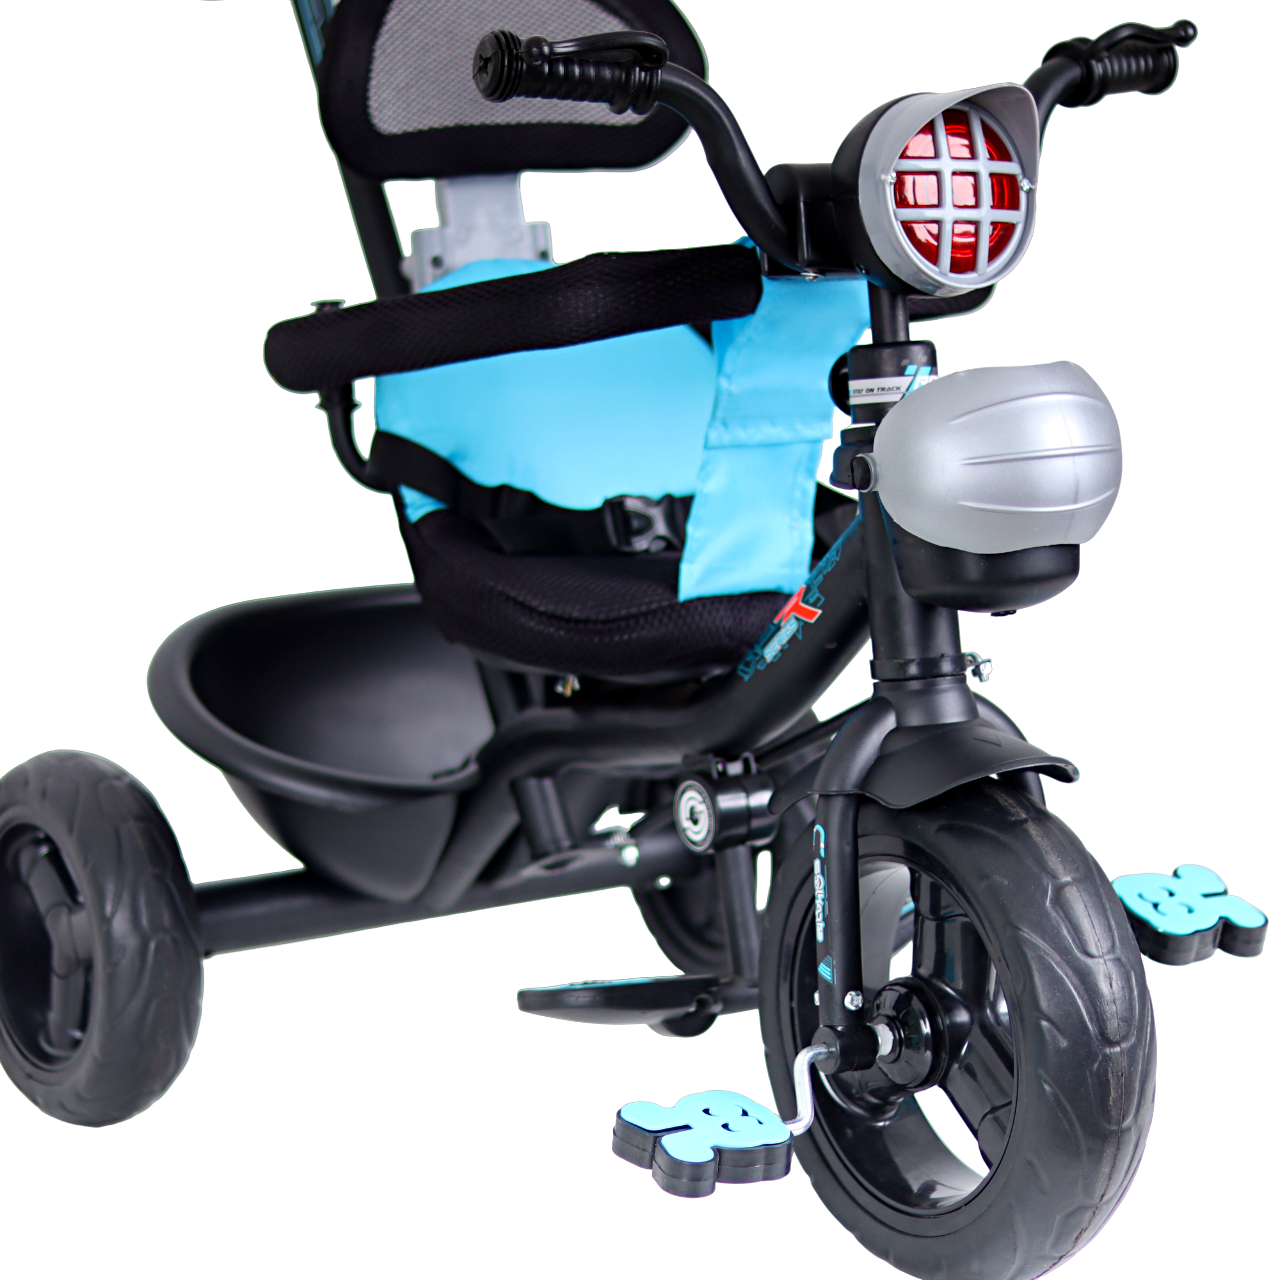 Luusa R9 Power Black Edition Tricycle for Kids - Hoodless Version